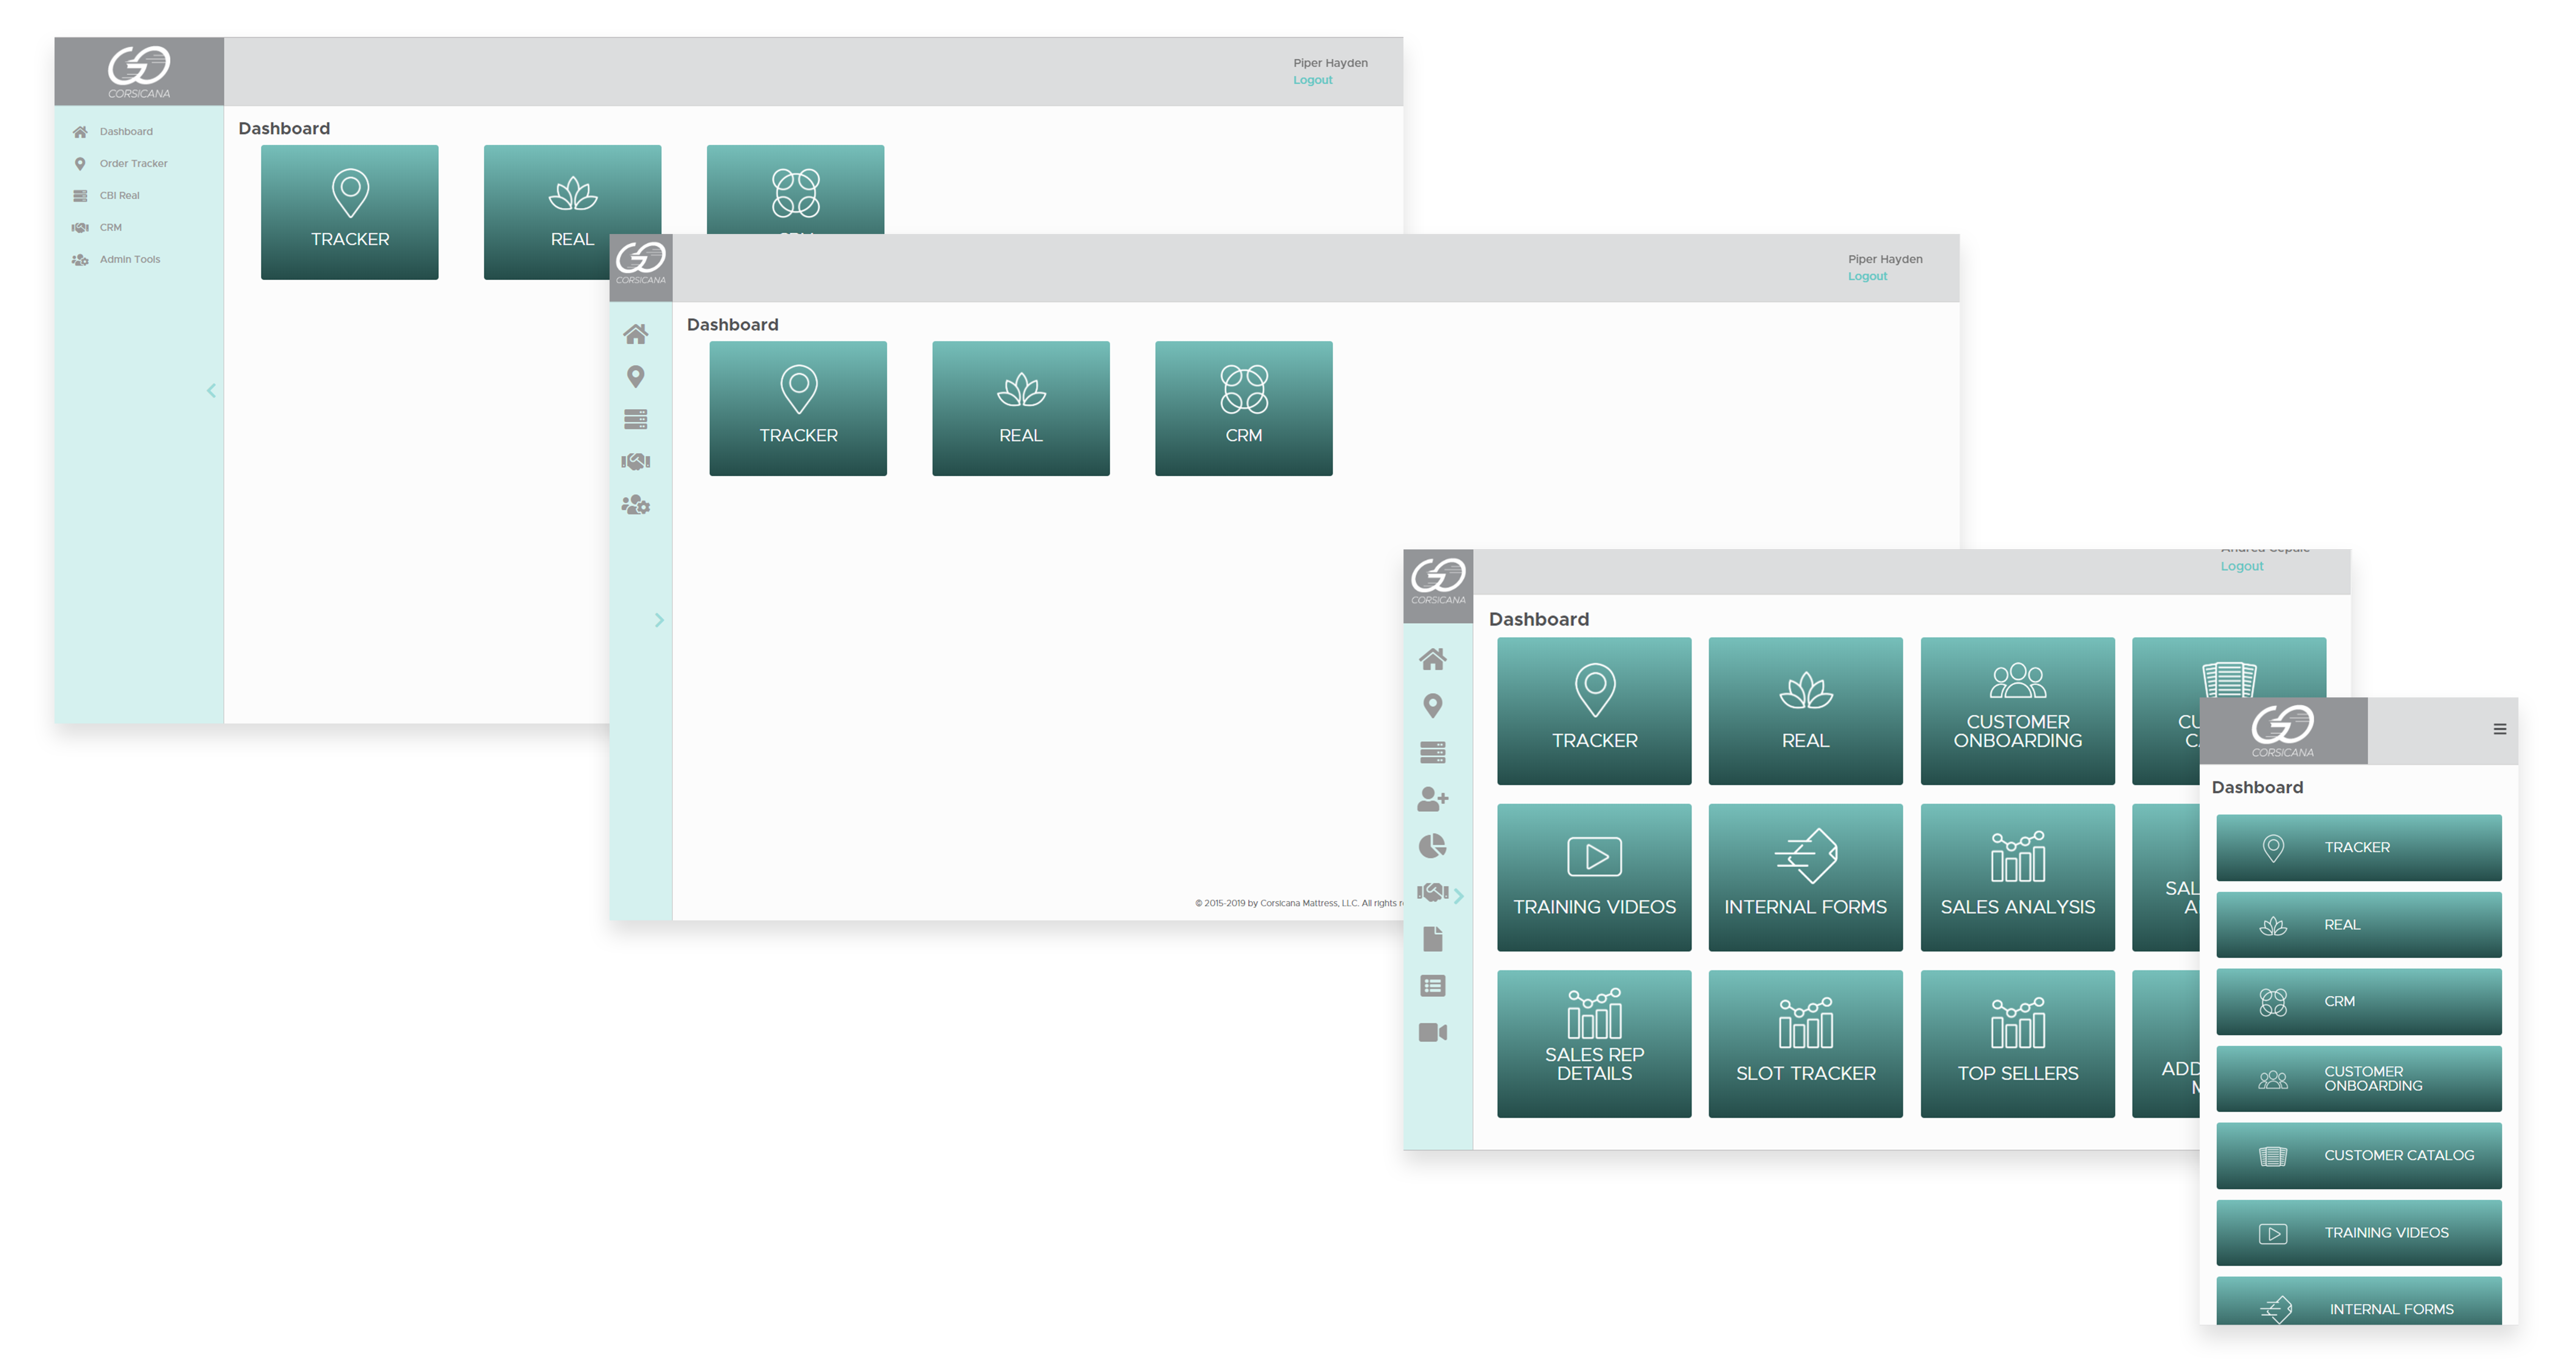 Display of dashboard via four different sizes